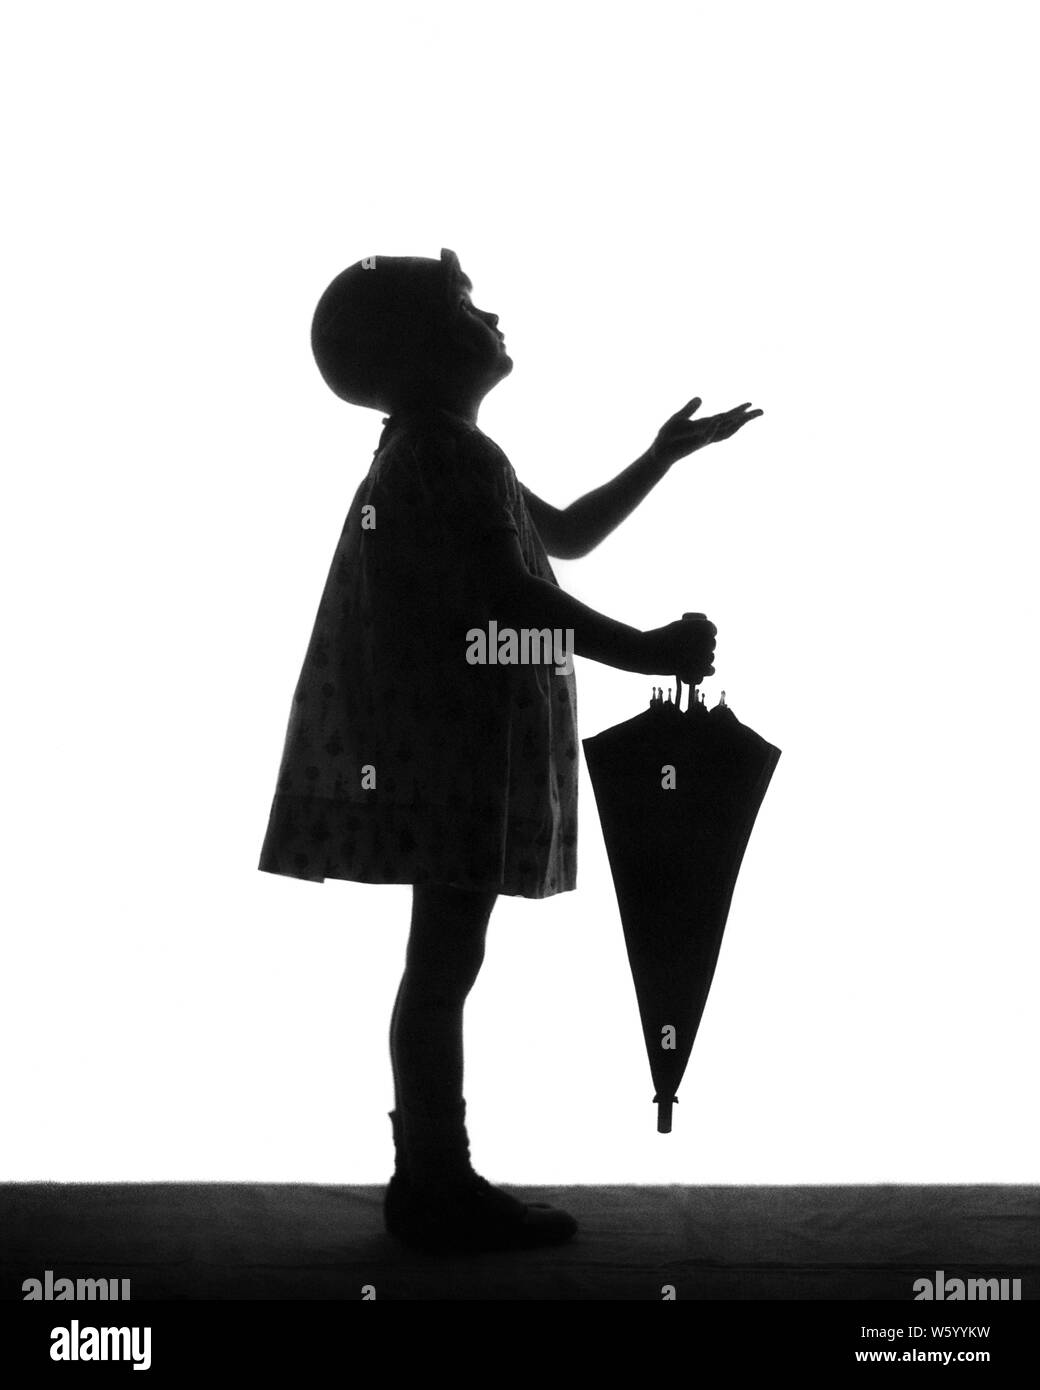 1920s ANONYMOUS SILHOUETTE OF LITTLE GIRL WEARING CLOCHE HAT HOLDING AN UMBRELLA PUTTING OUT HAND TO SEE IF SHE FEELS RAINDROPS - s1695 HAR001 HARS STUDIO SHOT SEE HOME LIFE COPY SPACE FULL-LENGTH RAINY CARING RAINING SYMBOLS SILHOUETTES CONFIDENCE B&W OUTLINE DISCOVERY SILHOUETTED CLOCHE SHE TO ANTICIPATION CONCEPT CONCEPTUAL STYLISH ANONYMOUS SYMBOLIC CONCEPTS COOPERATION IF JUVENILES KONE RAINDROPS BLACK AND WHITE HAR001 OLD FASHIONED PRECIPITATION REPRESENTATION Stock Photo